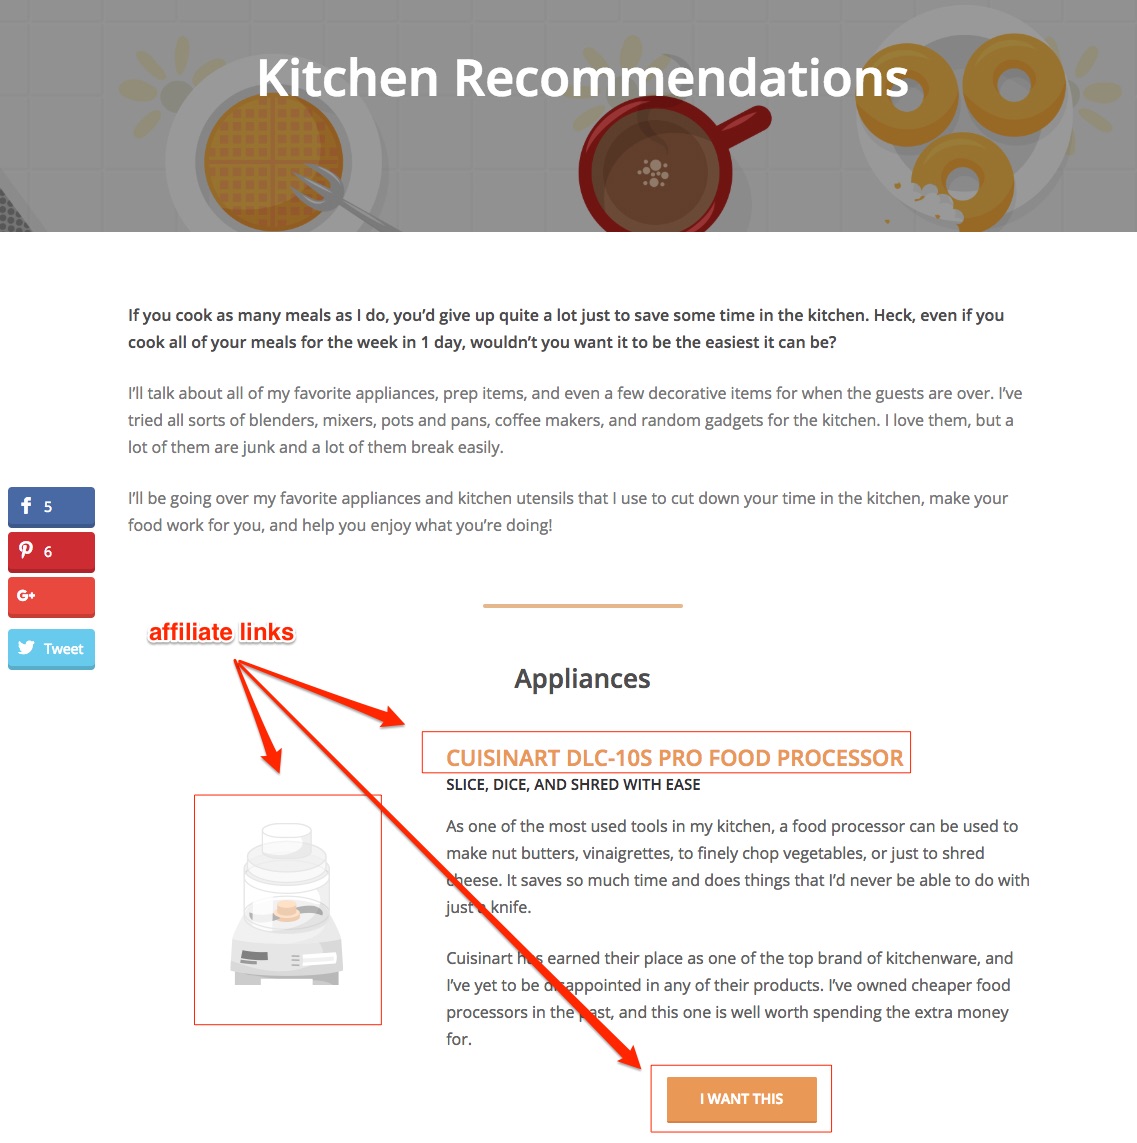 Kitchen Recommendations Ruled Me